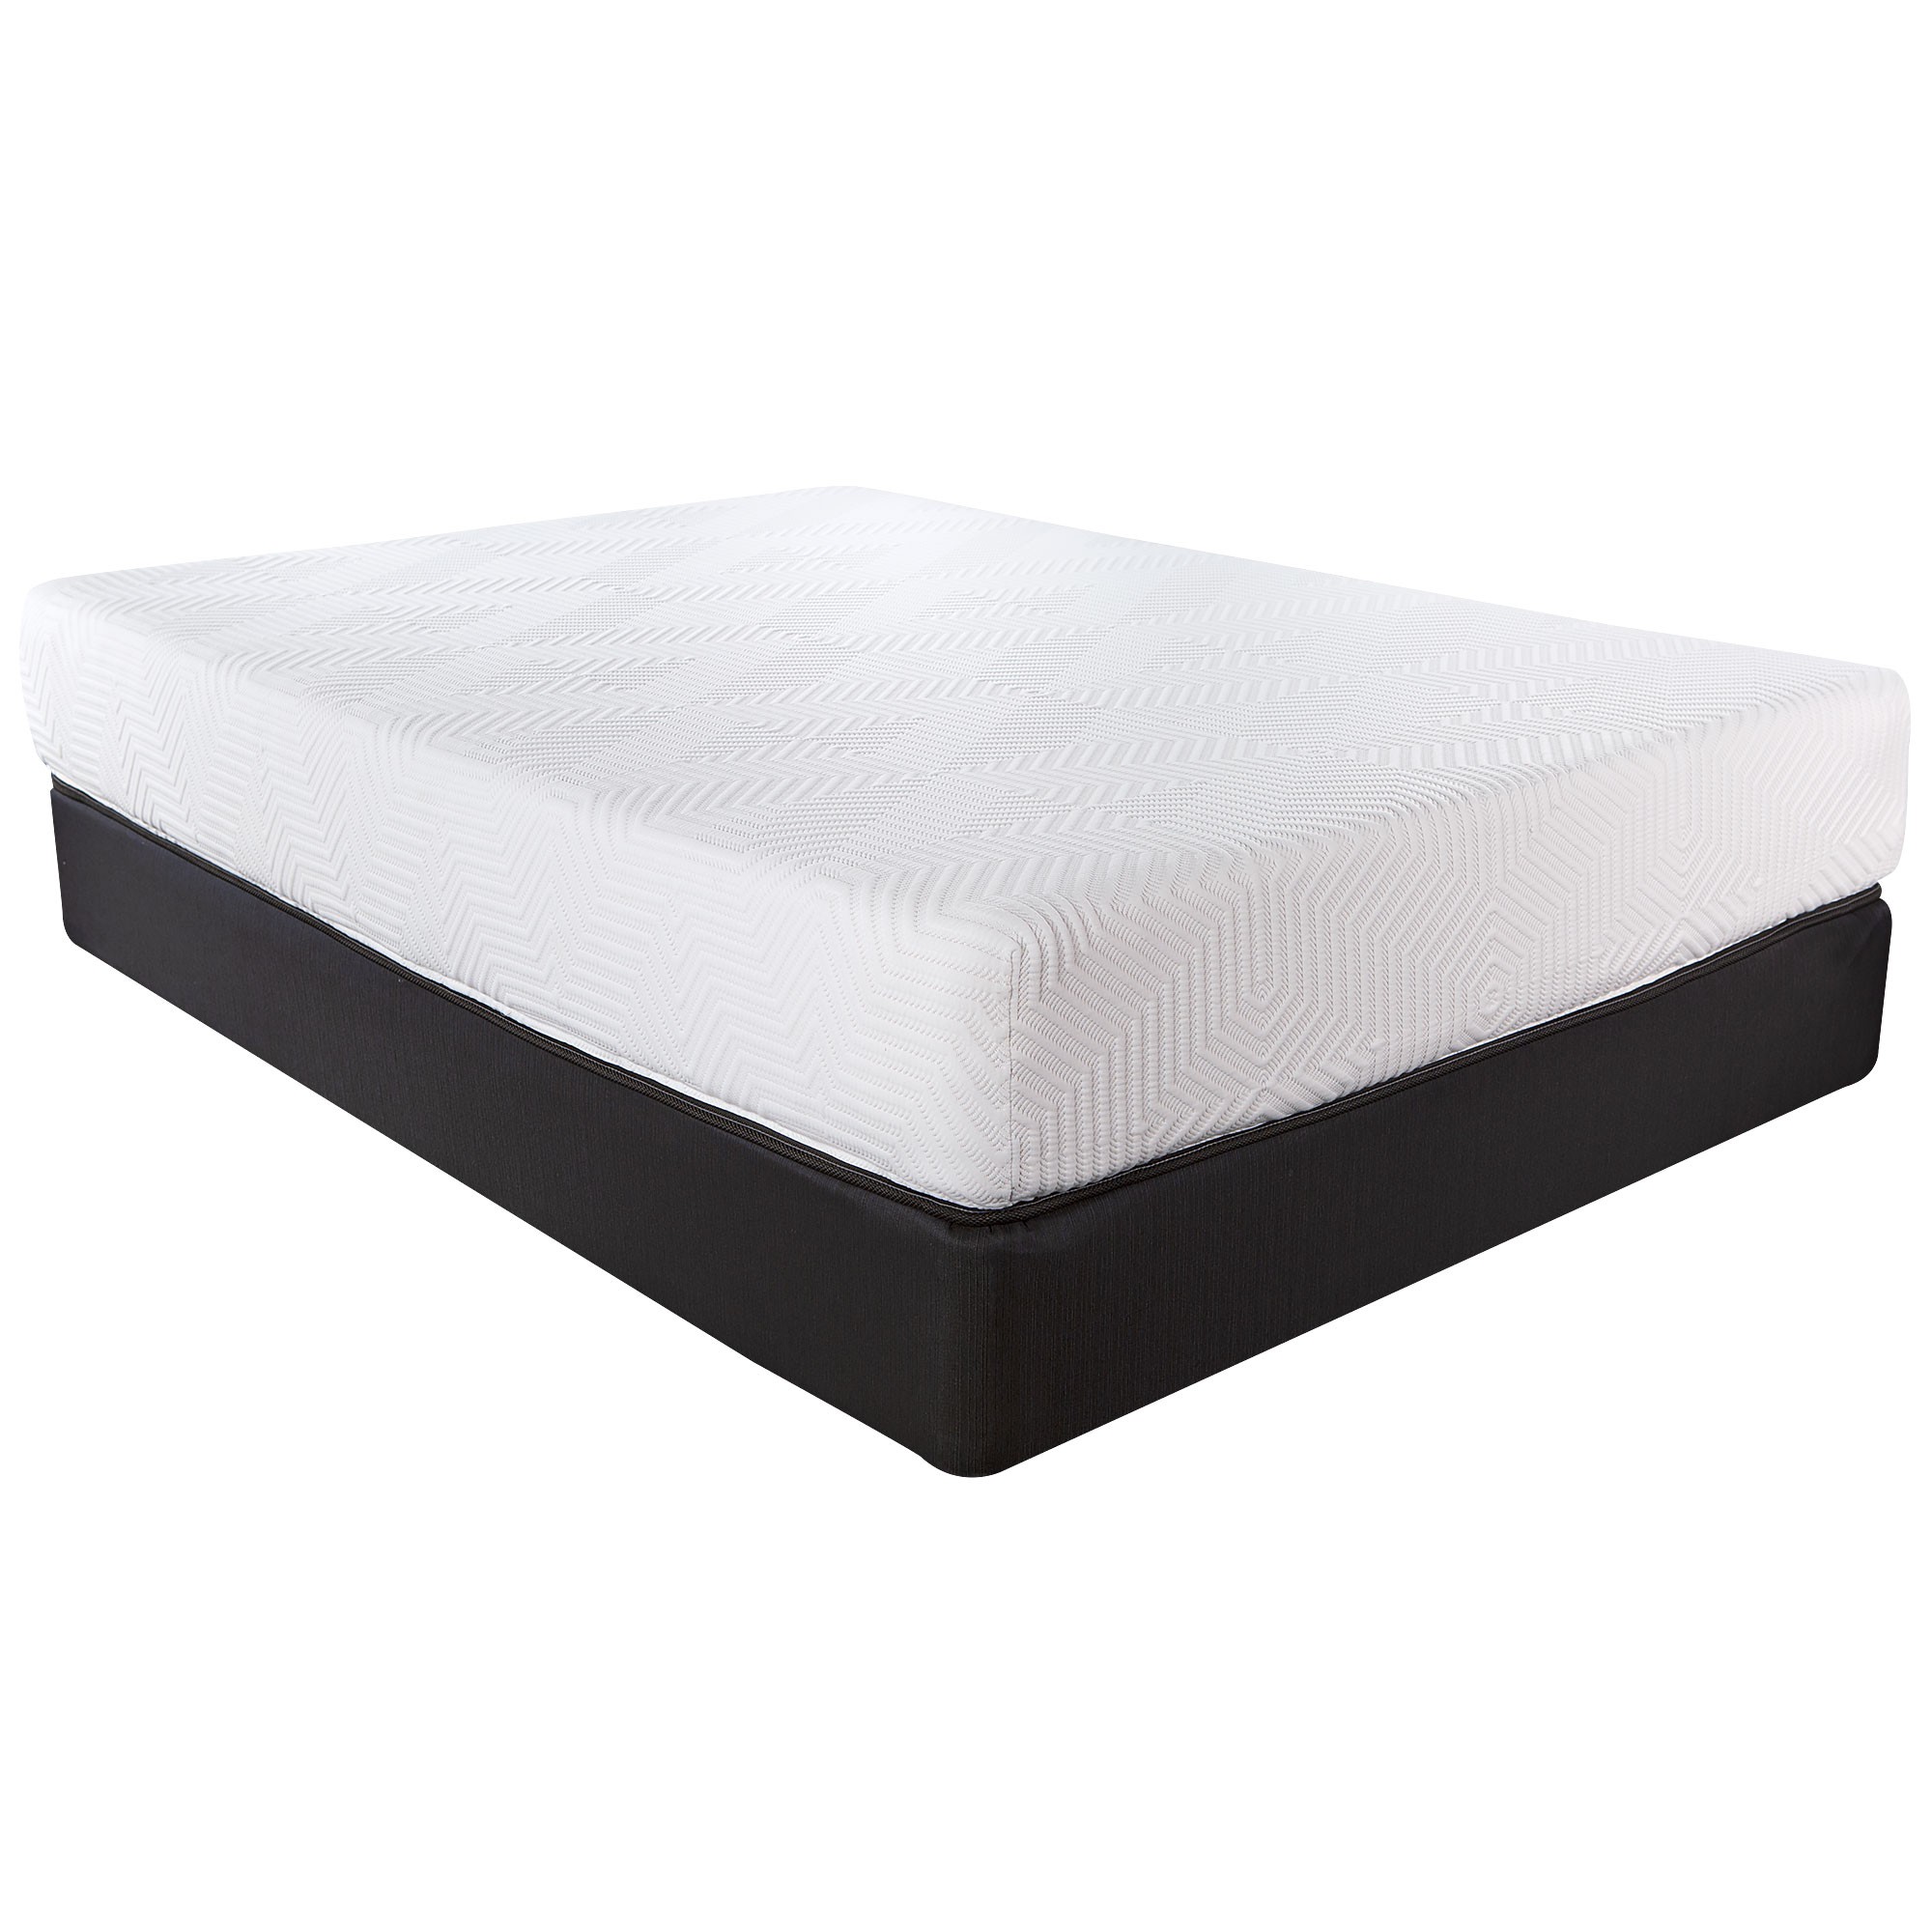 10.5" Hybrid Lux Memory Foam And Wrapped Coil Mattress Full Cal King-391698-1